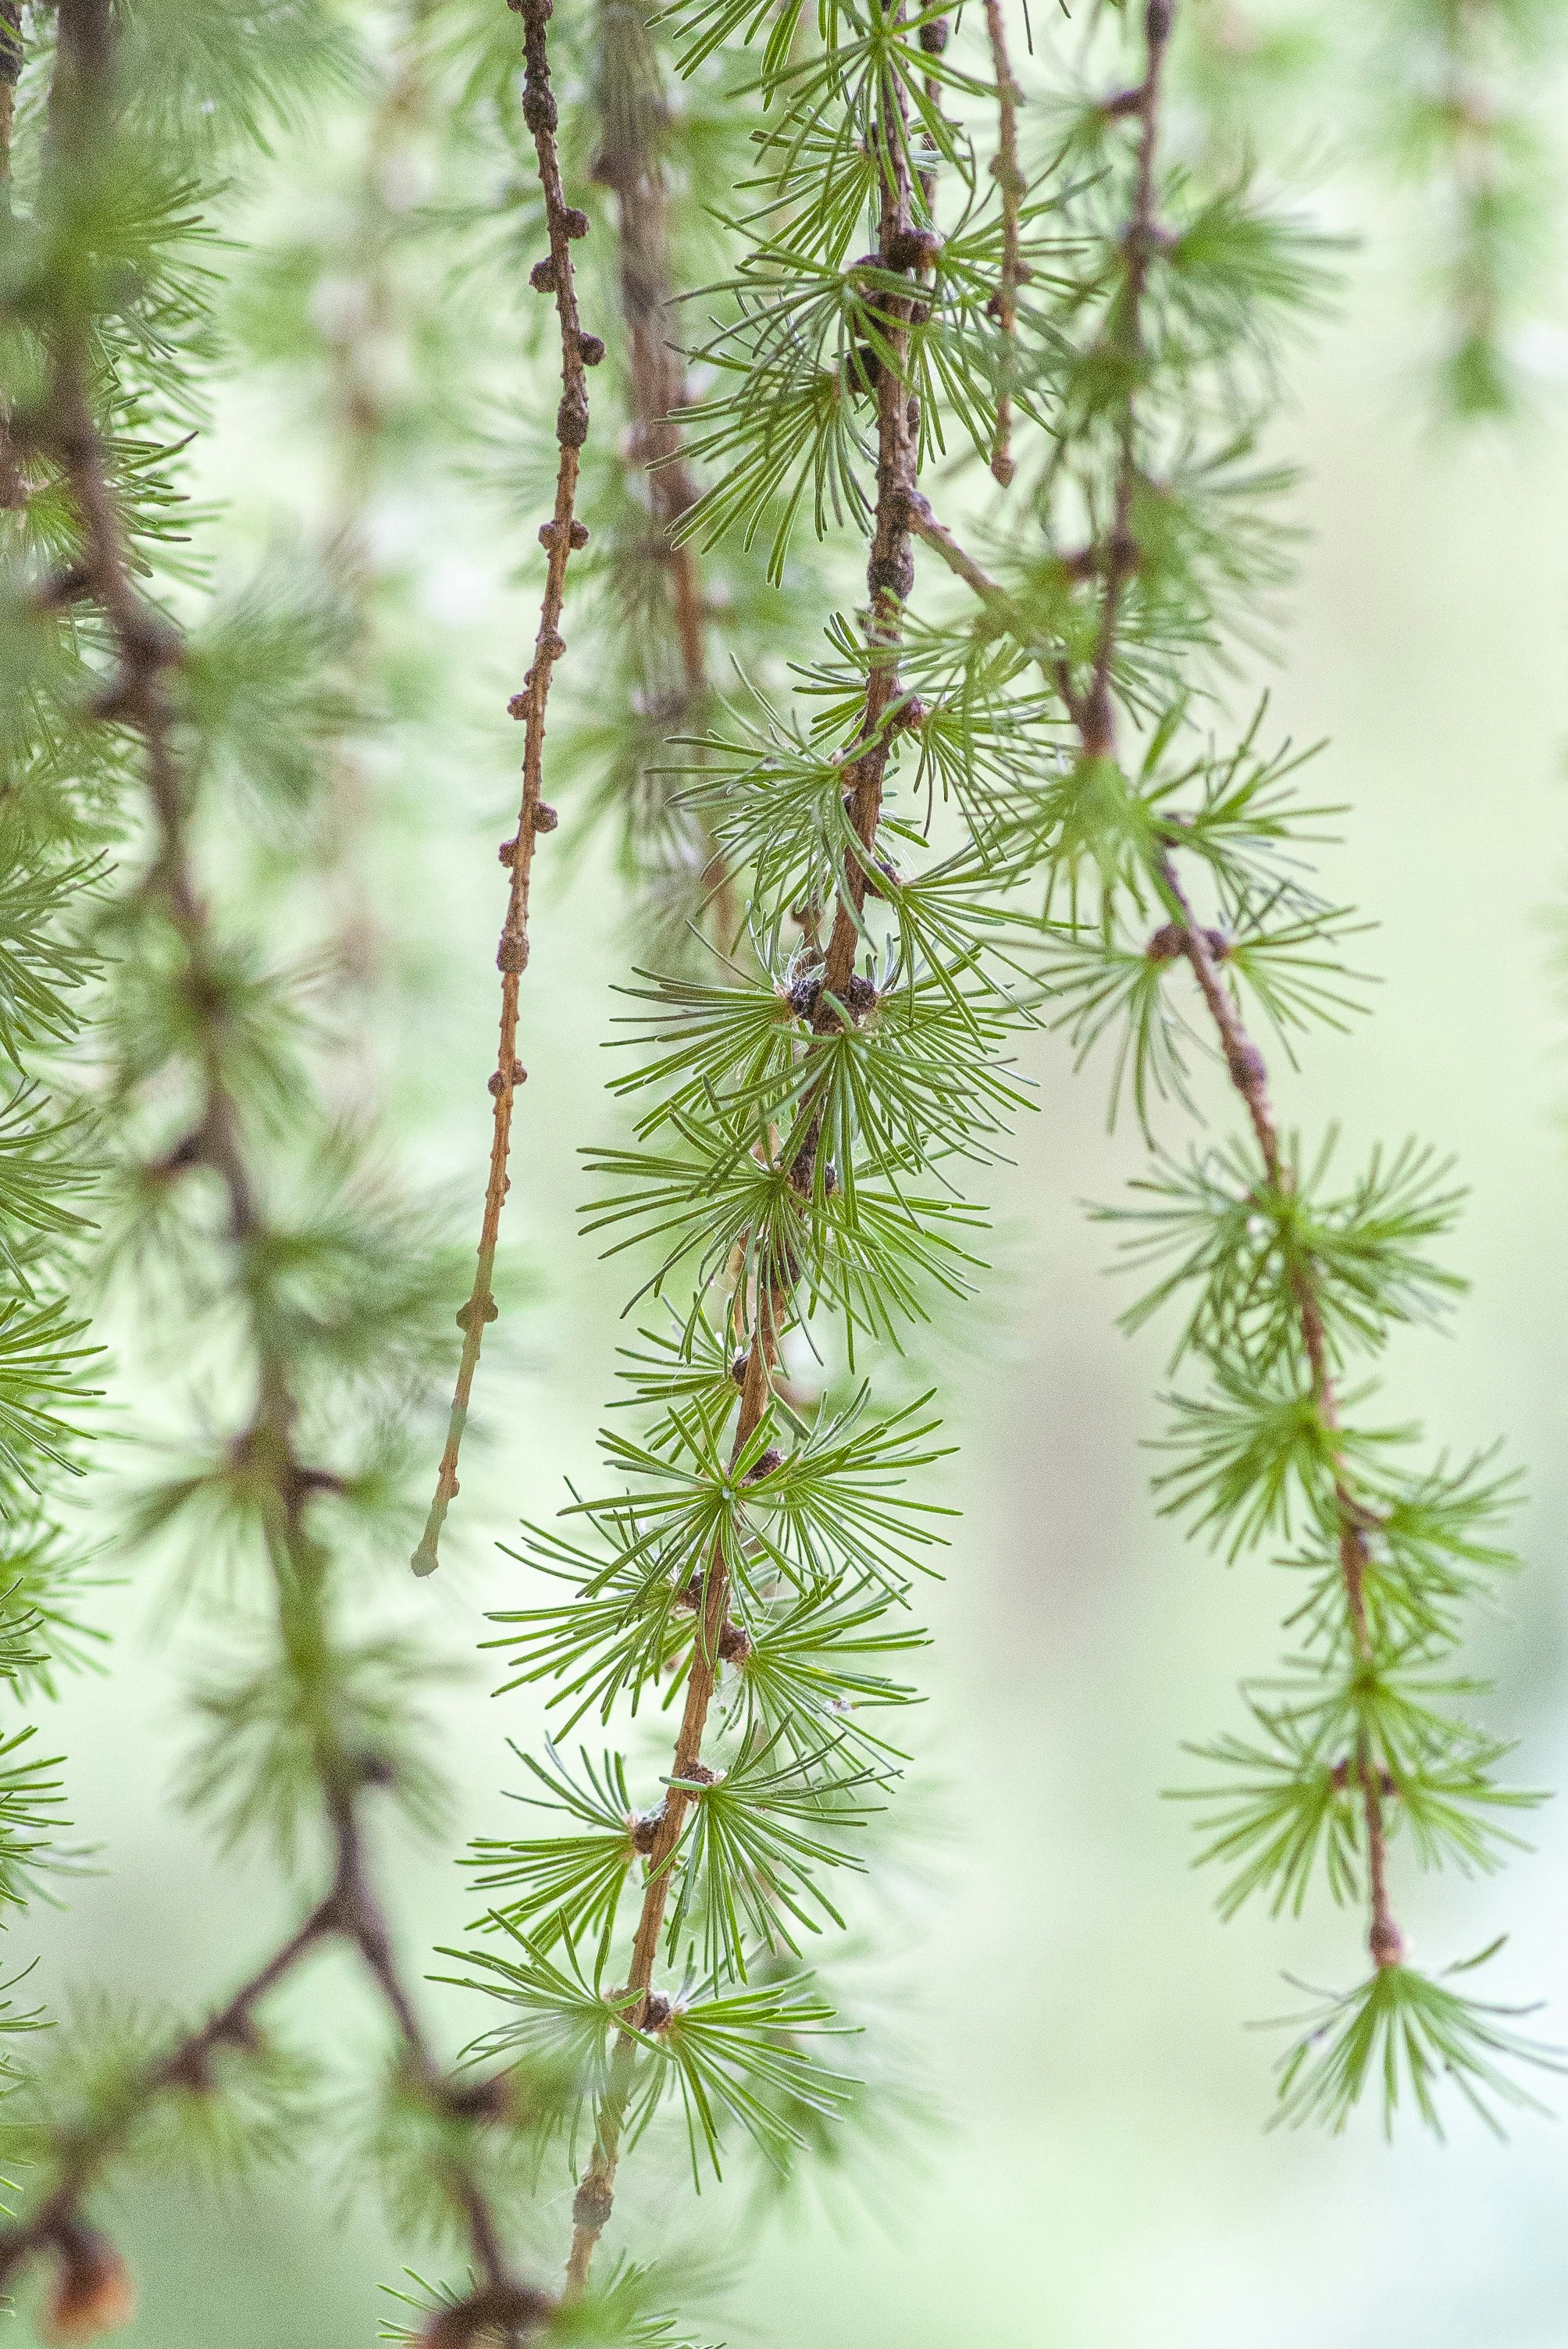 Young larch in spring

